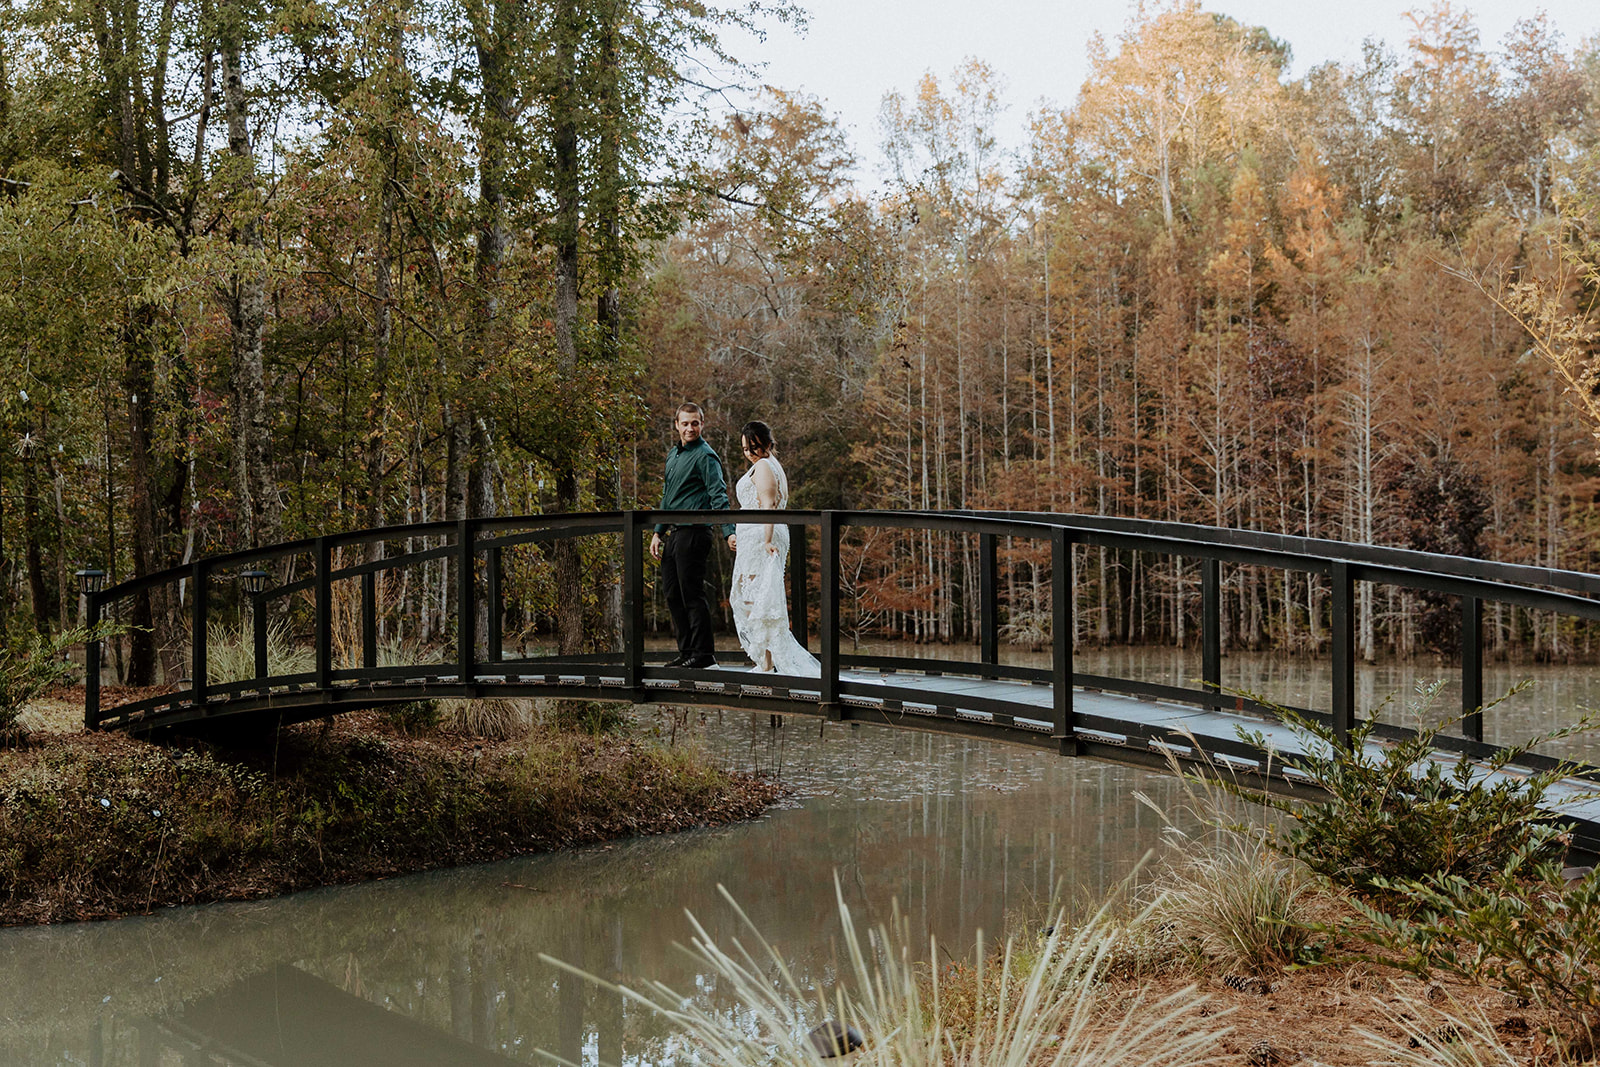 A bride in a lace dress and a groom in a black suit stand close together on a leaf-covered dock by a lake with trees in the background. The bride holds a bouquet of flowers.